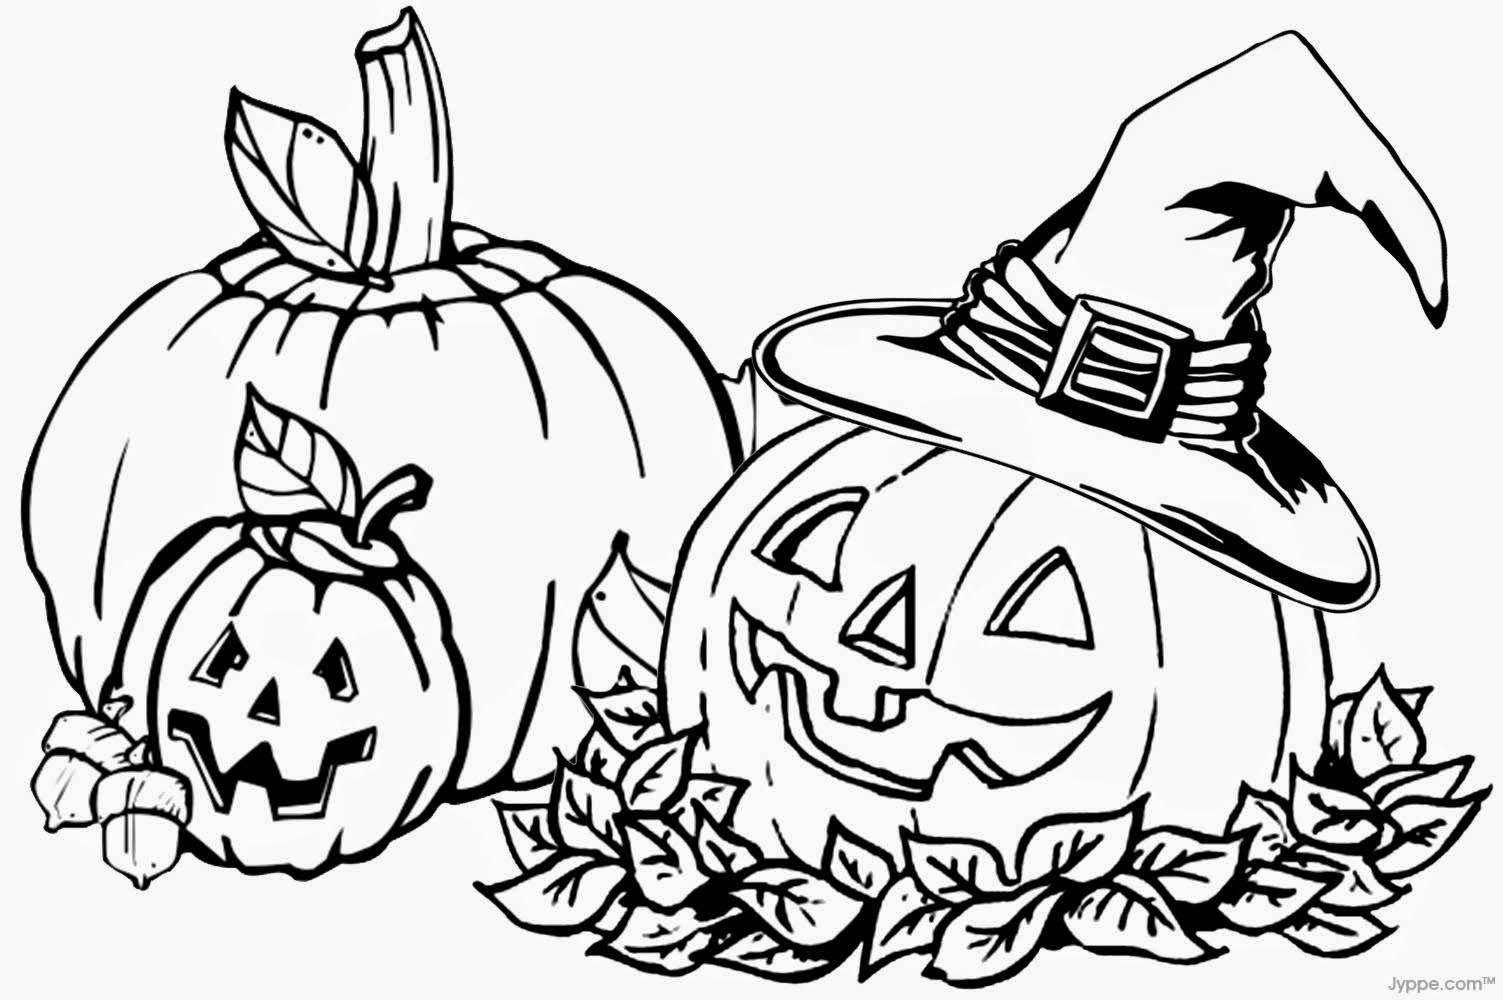 Free Printable Halloween Pumpkin Coloring Pages | Free Coloring Pages